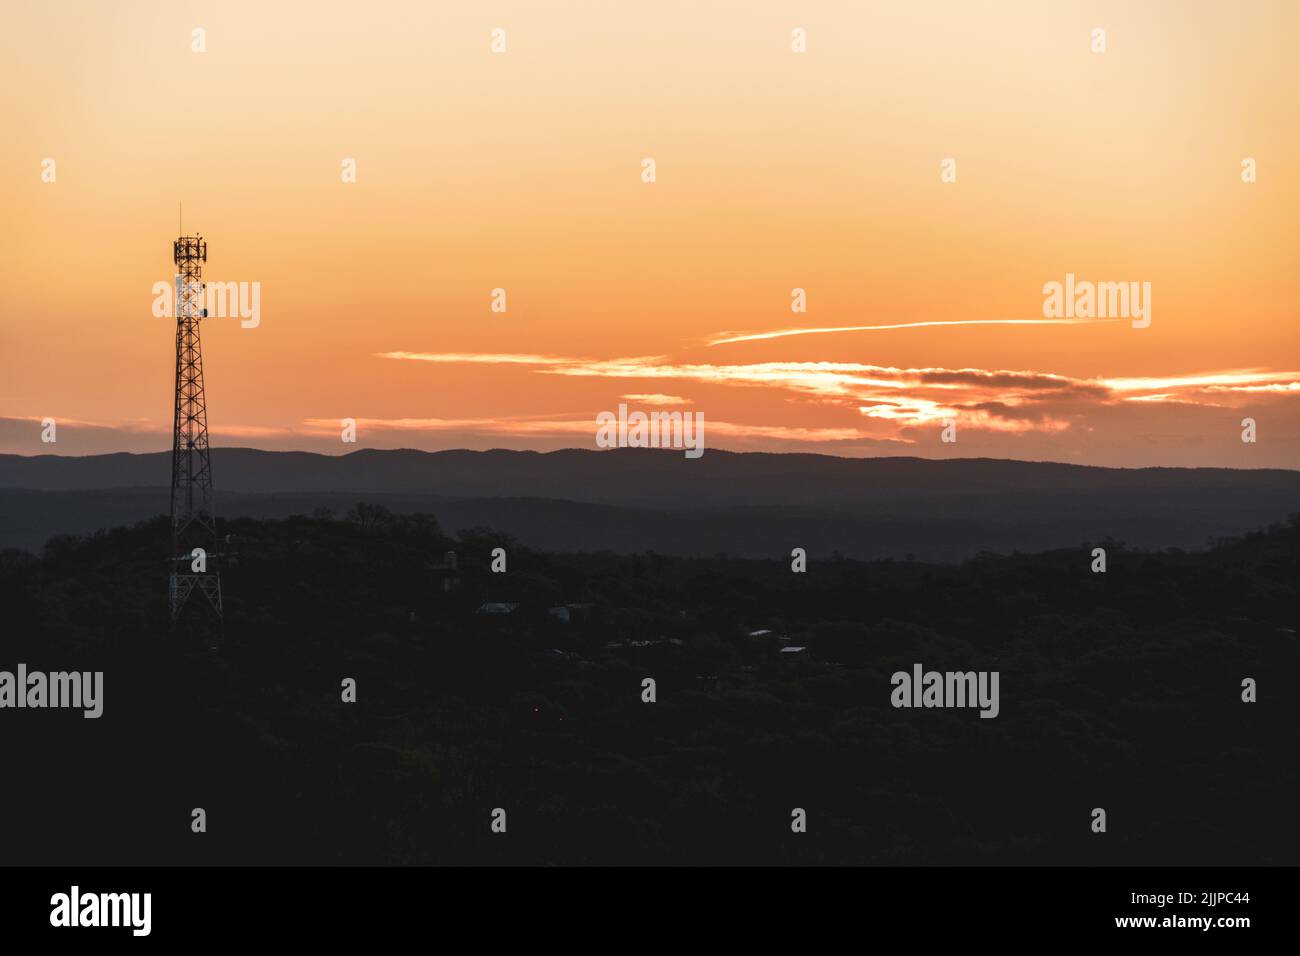 A beautiful landscape of a hill with a radio tower on the sunset Stock Photo